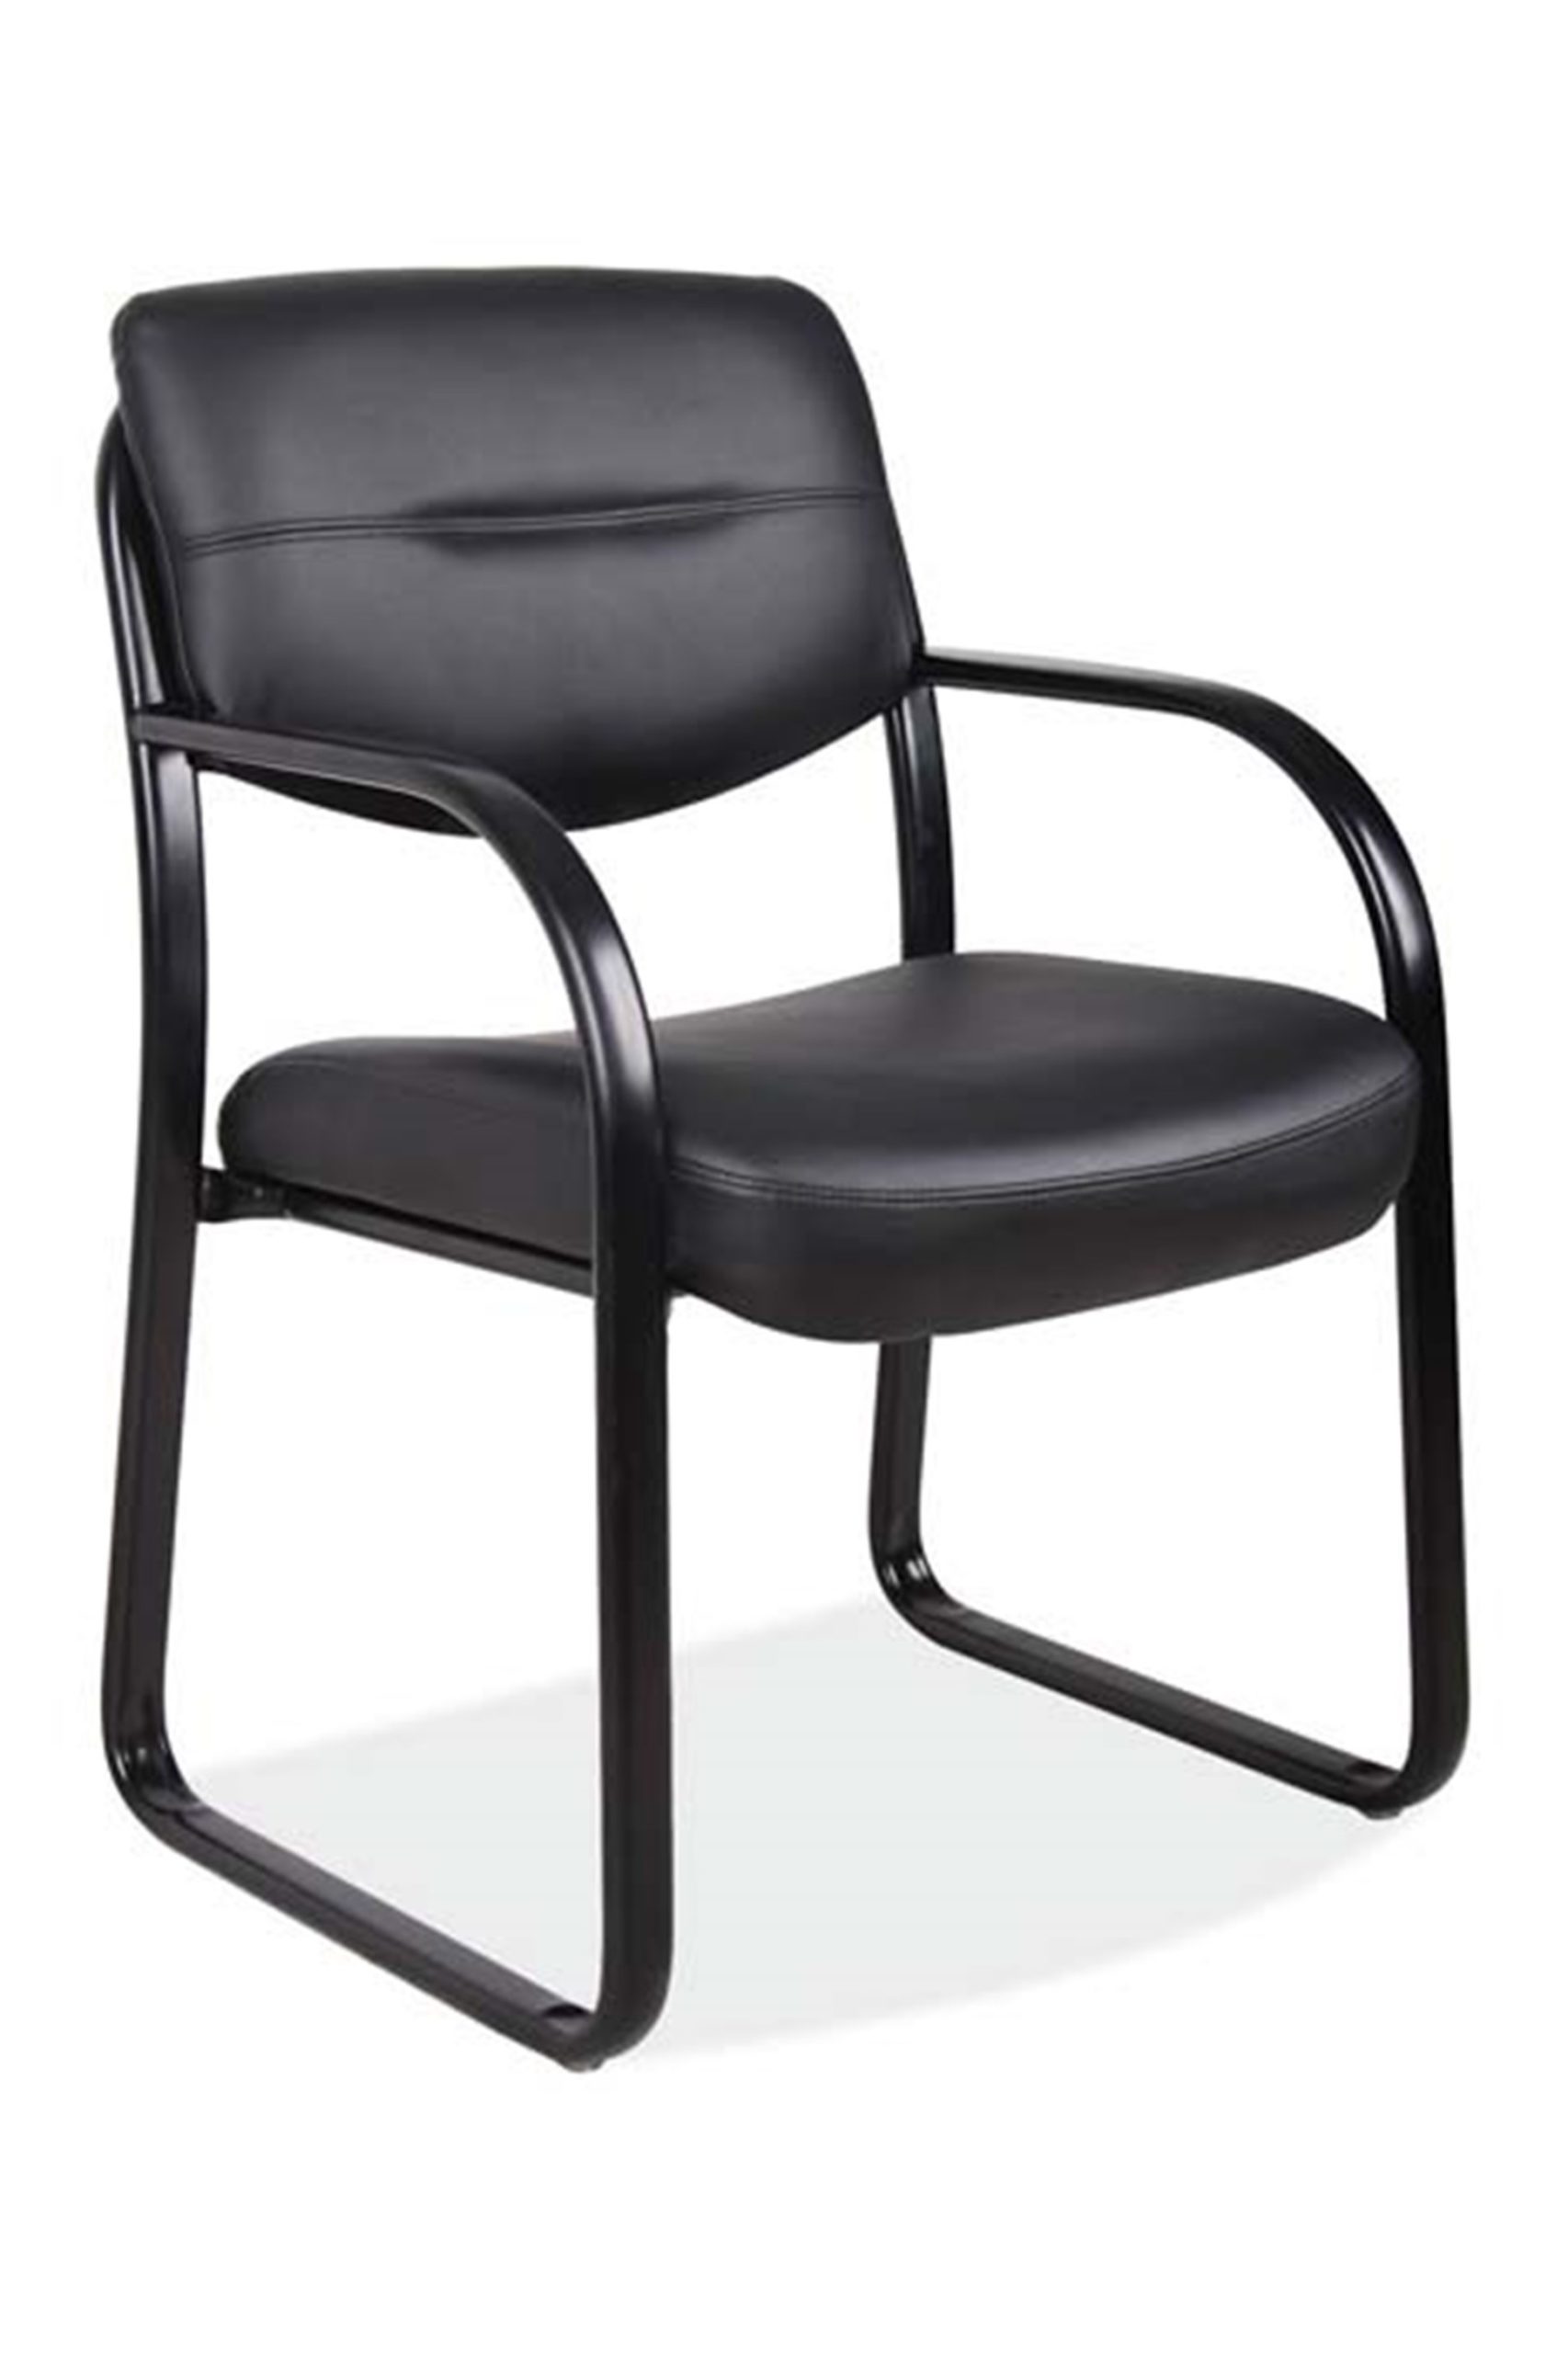 Sled base guest armchair with looped steel powder-coated arms, durable sled base, black Leathertek seat and back, and floating back for easy cleaning.